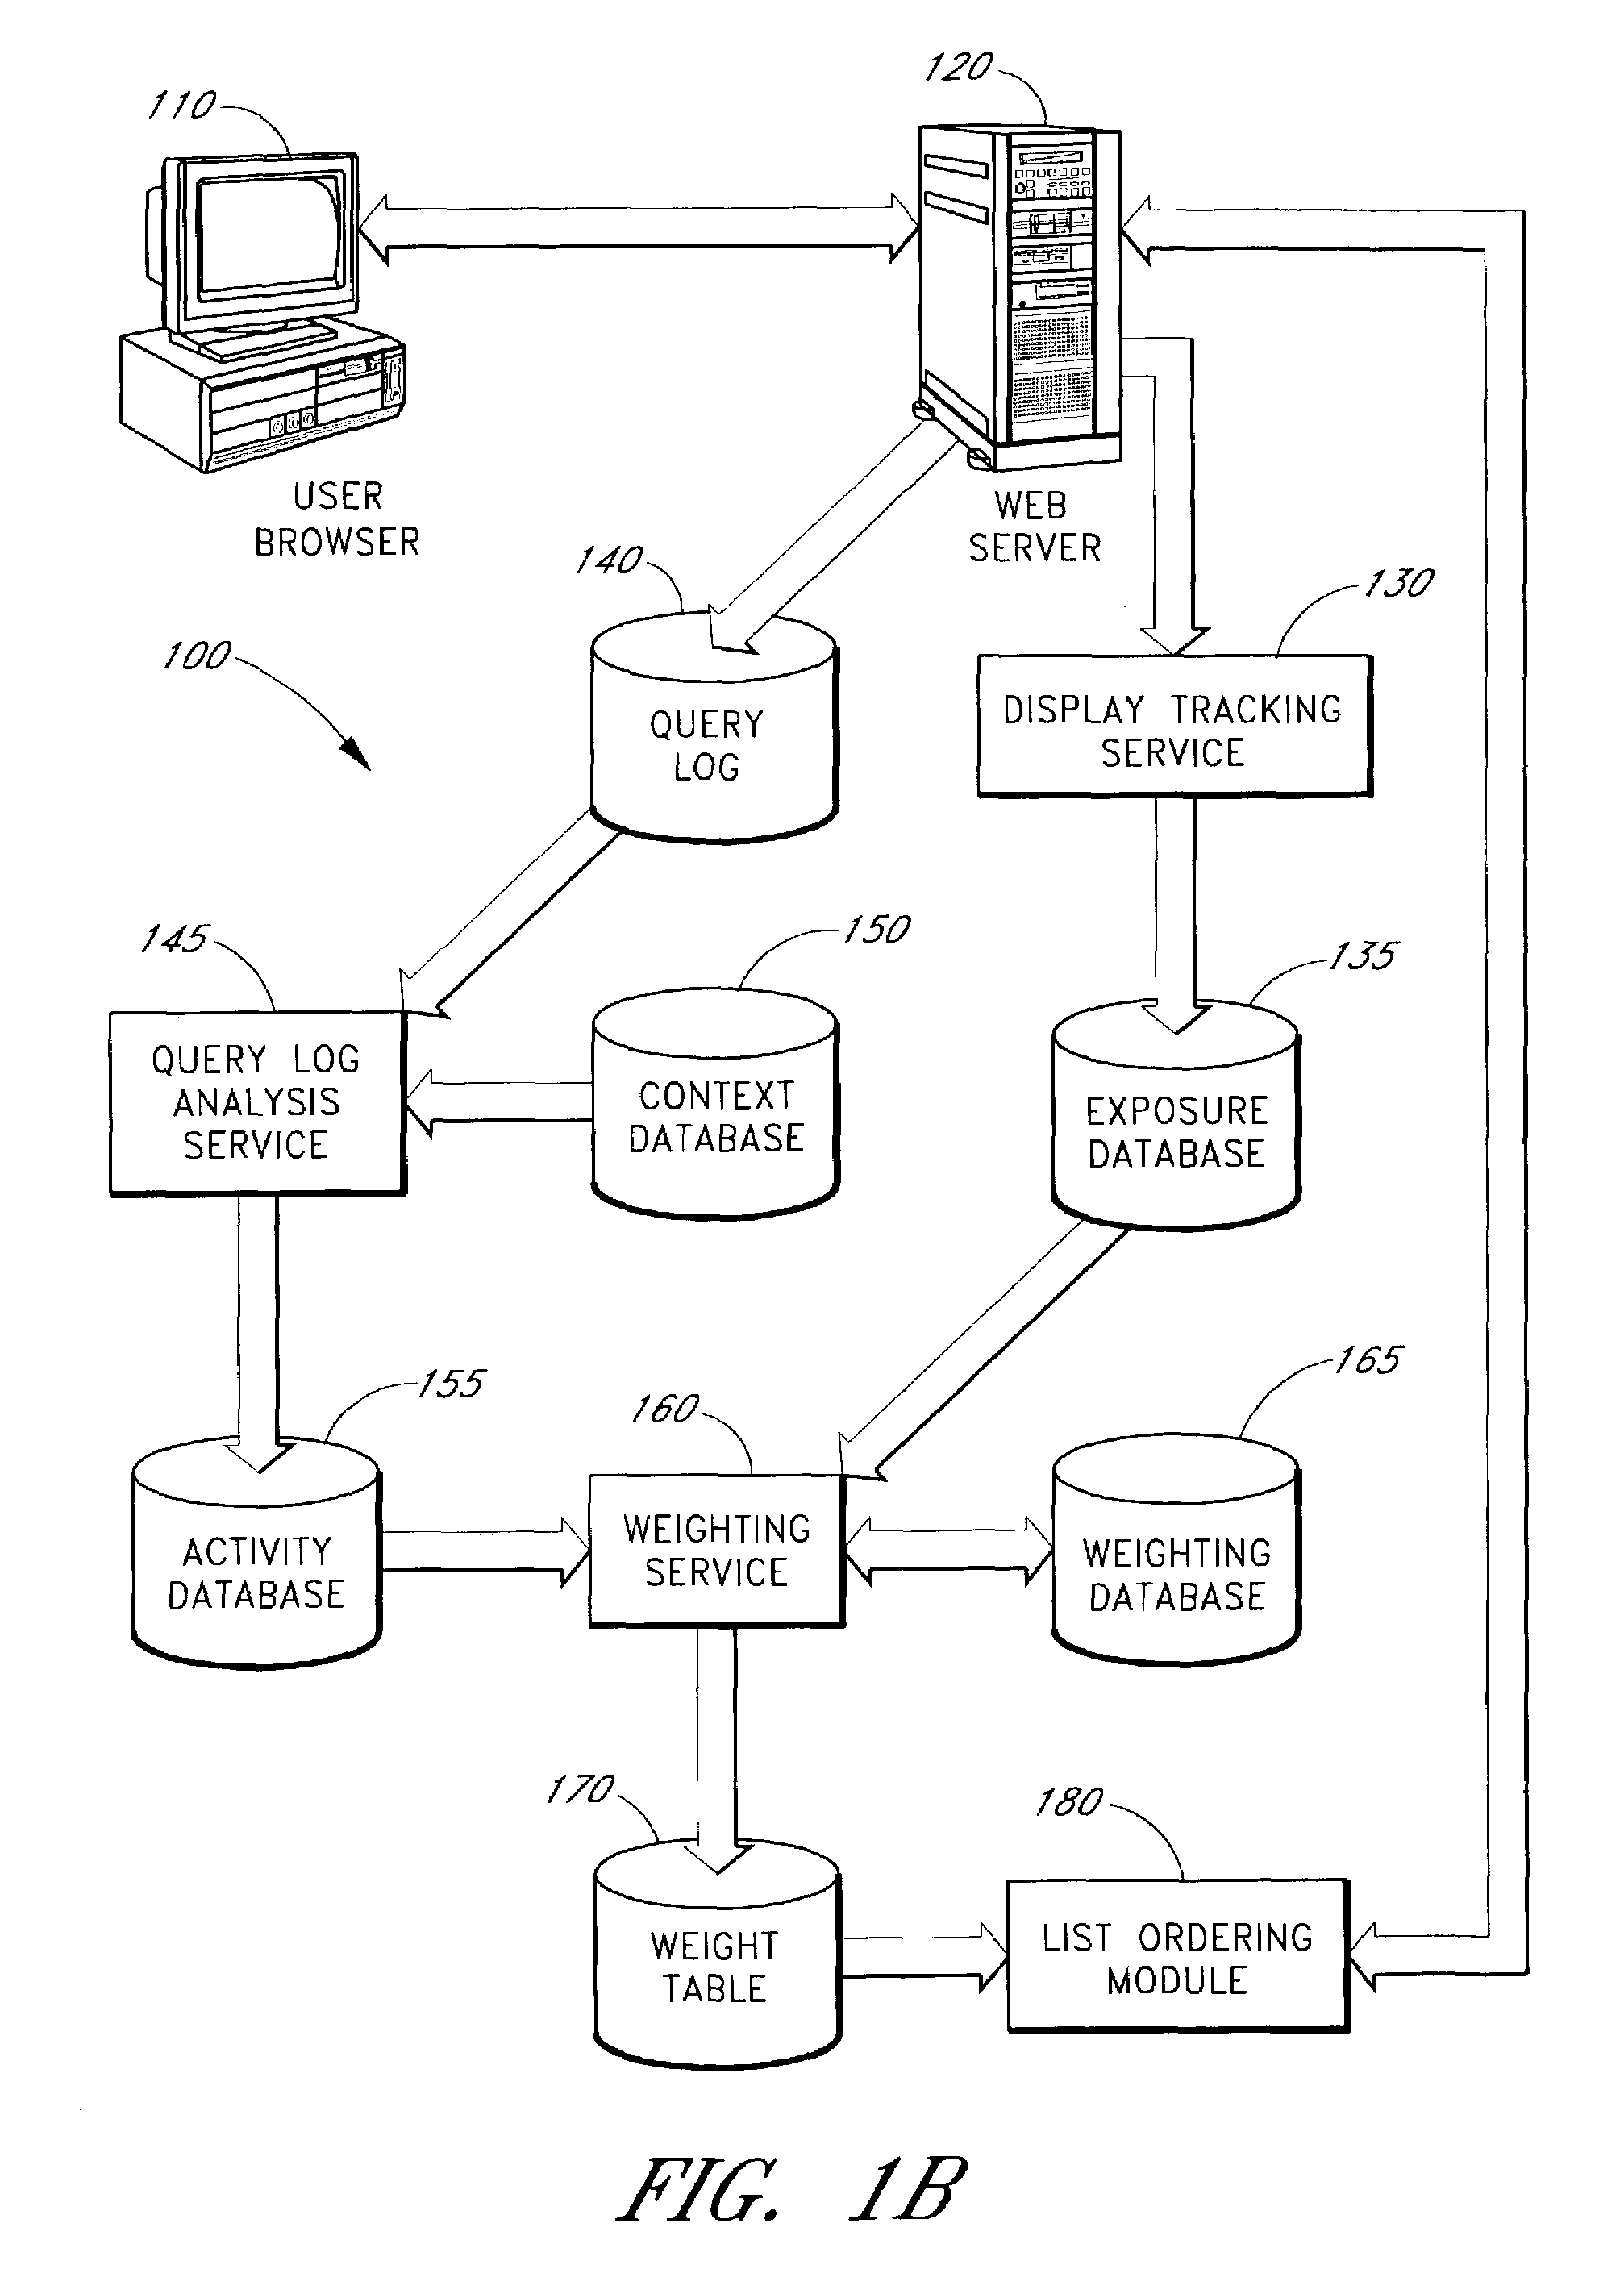 Computer processes and systems for adaptively controlling the display of items